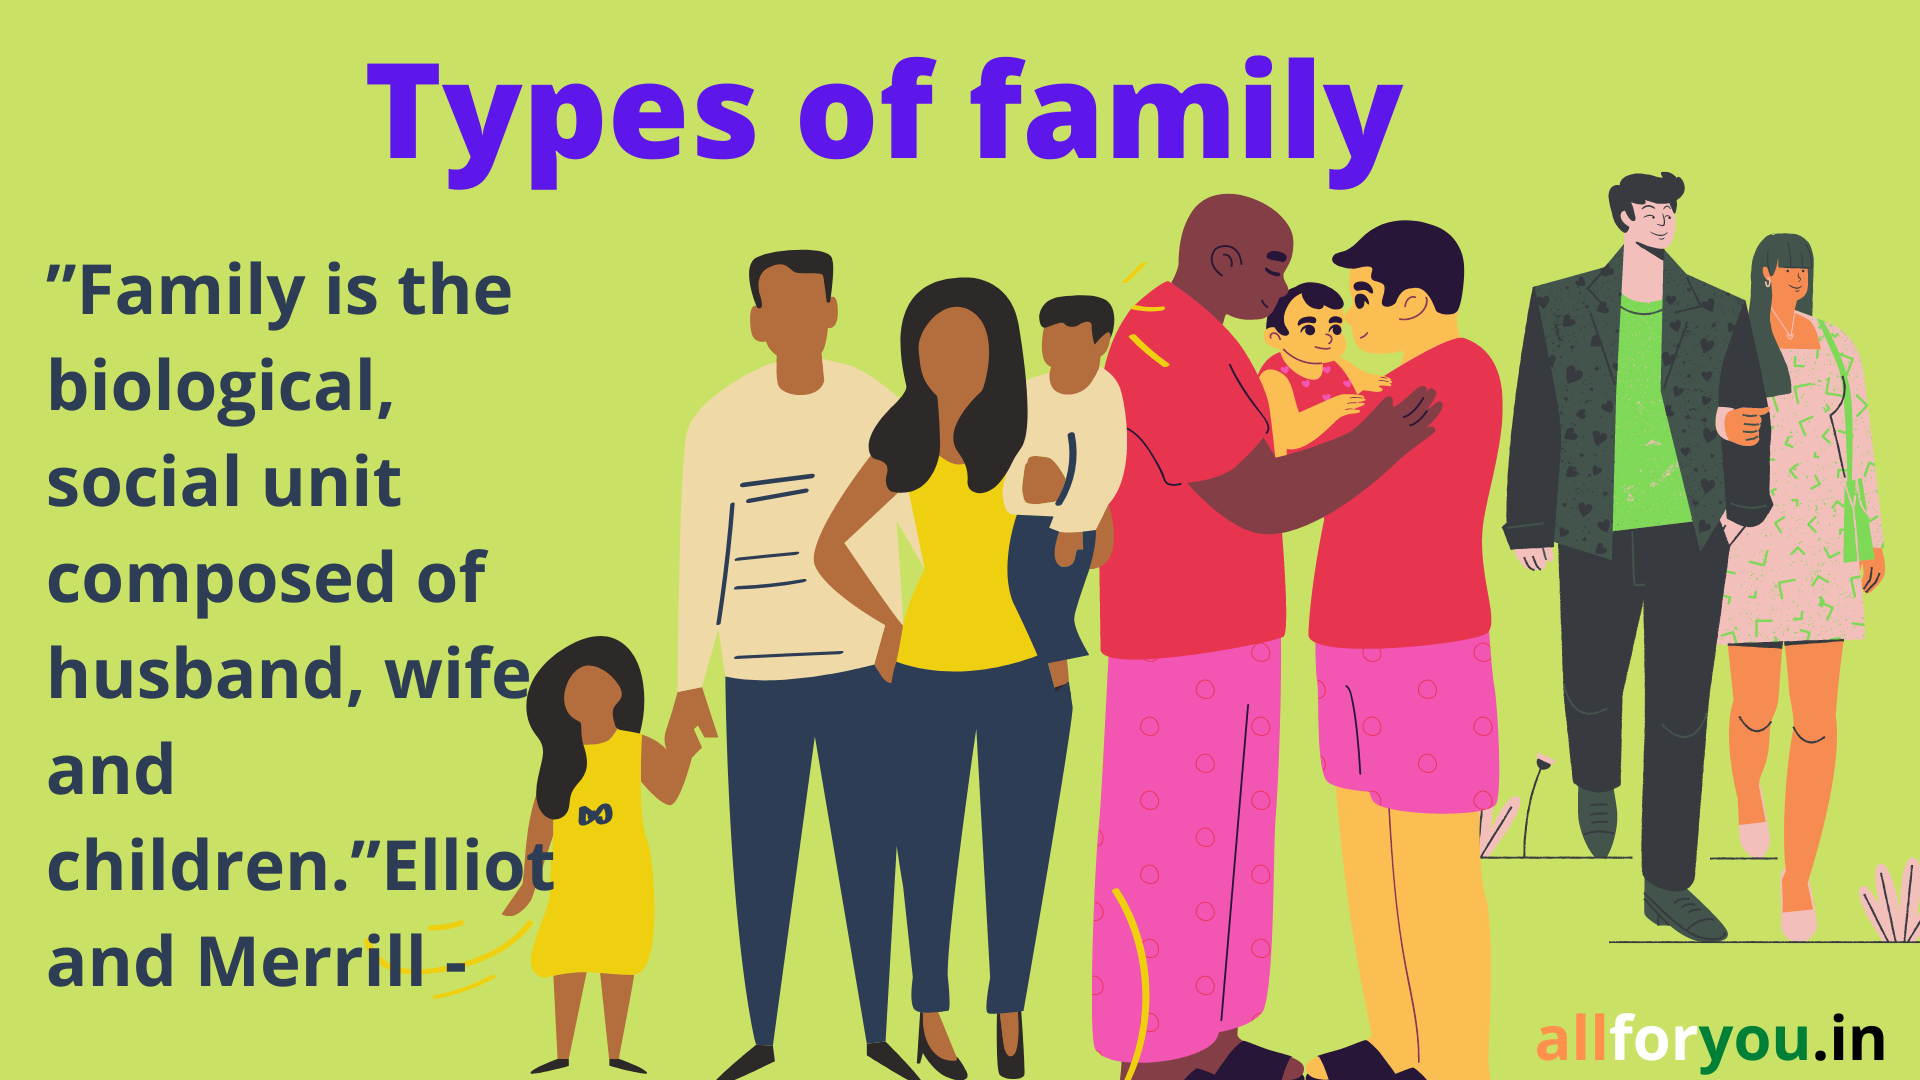 type-of-family-all-for-you